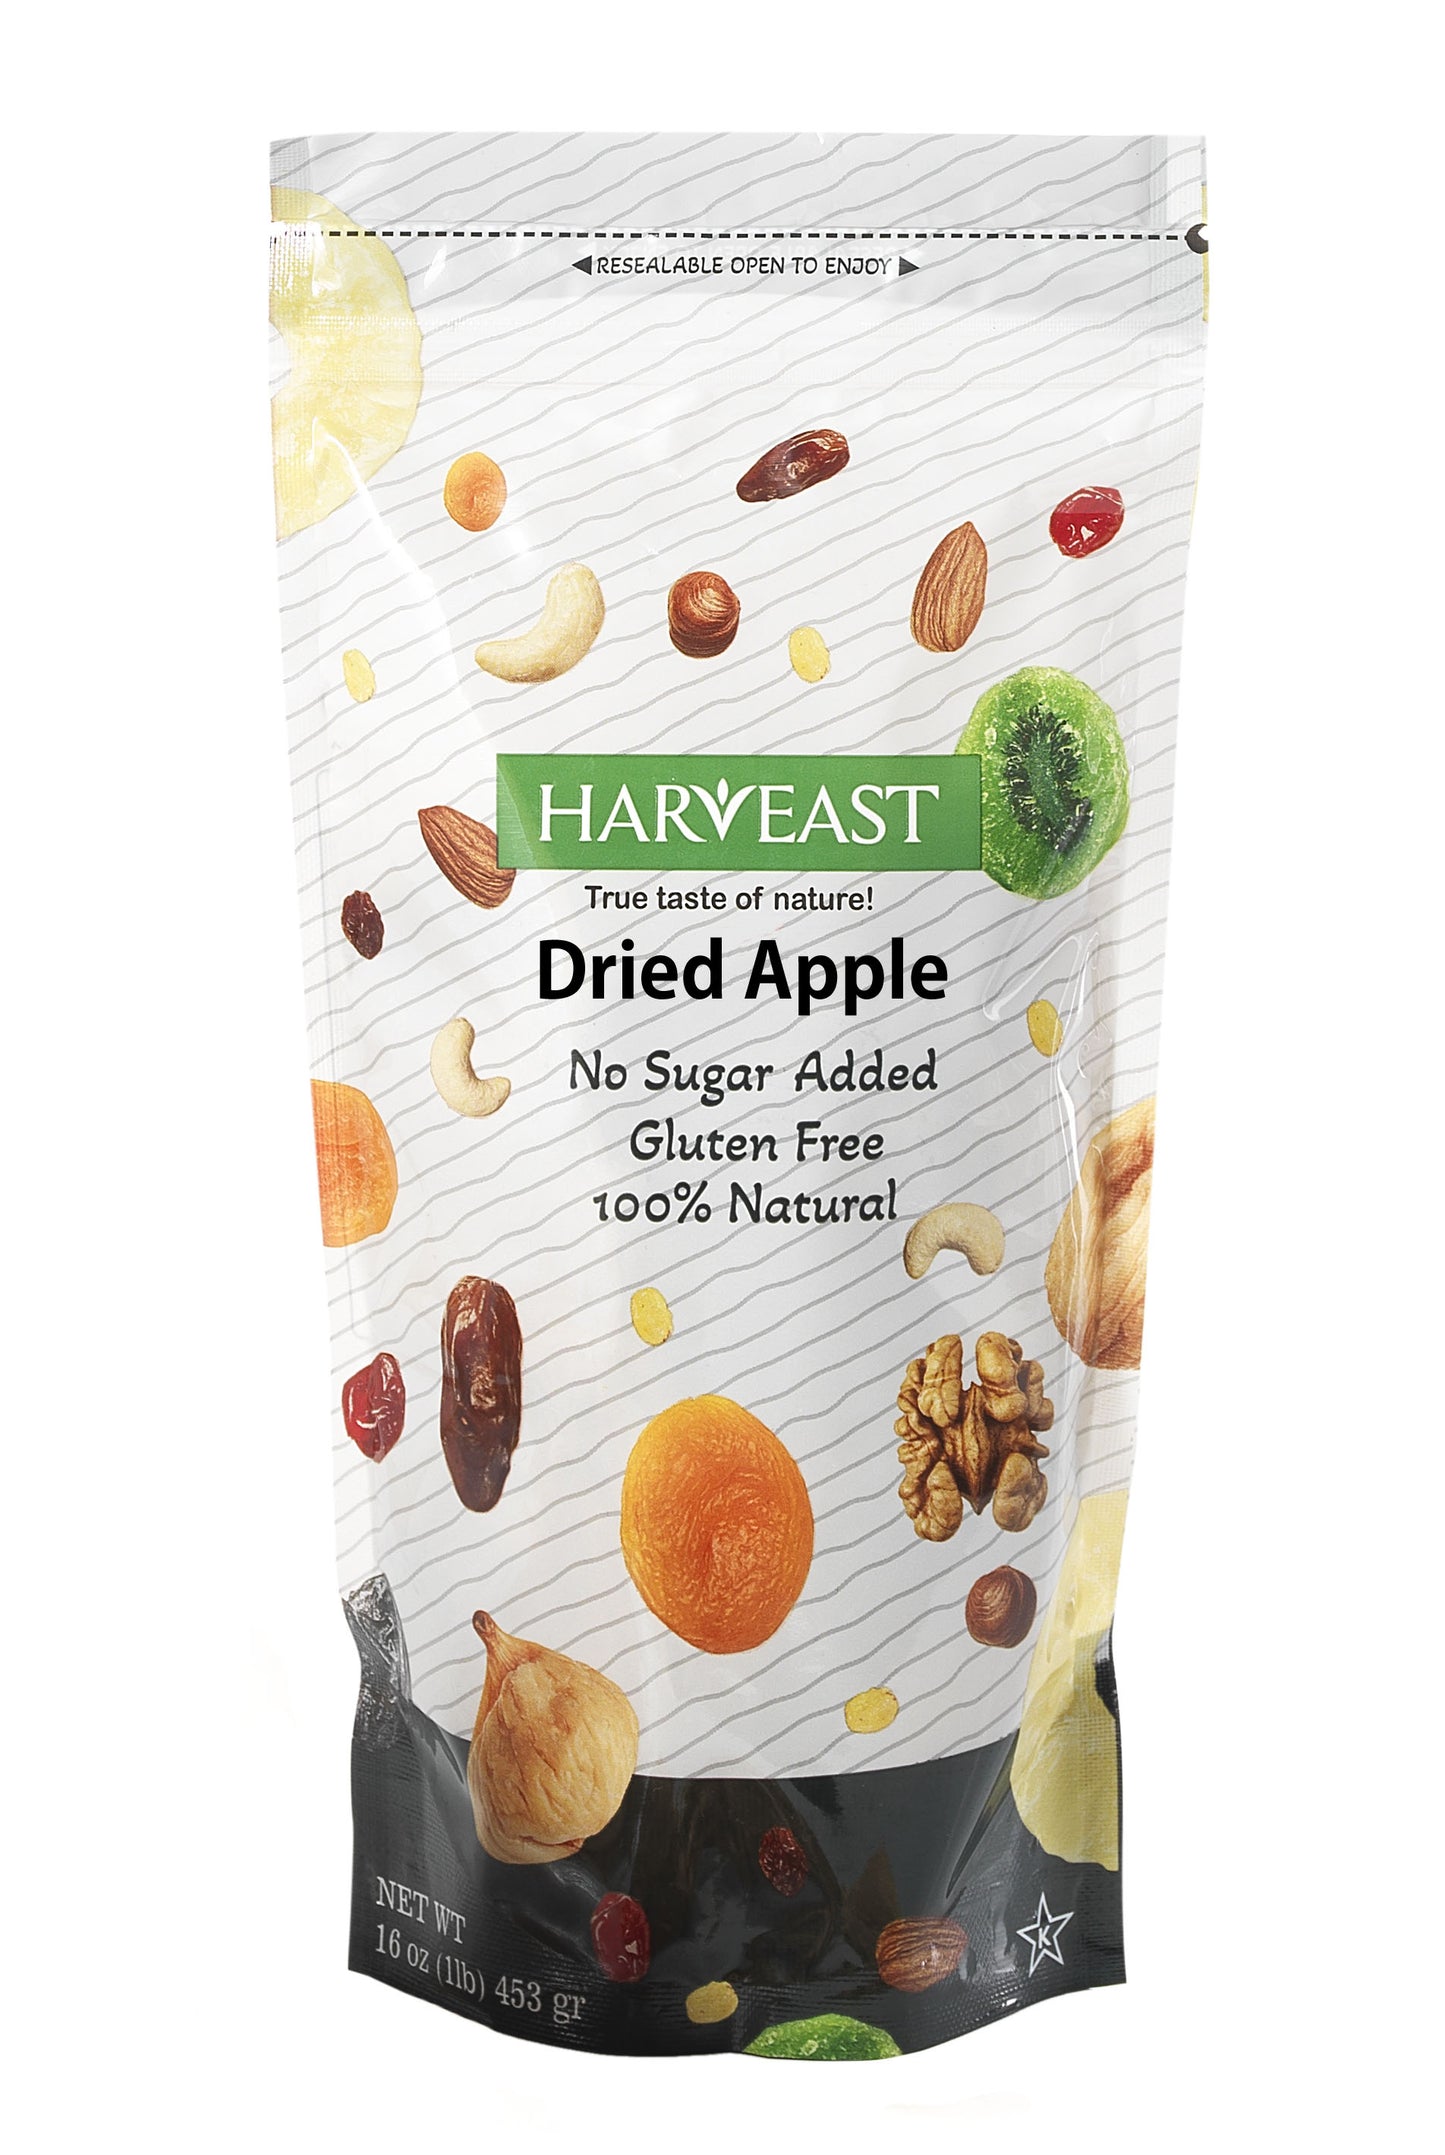 HARVEAST Dried Apple Slices | Unsulfured Gourmet Dehydrated Apples, No Sugar, Gluten Free, Kosher, Vegan, Non-GMO | Dried Sliced Apple Fruit in Resealable Bag, Delicious Healthy Snack 8.81 Oz 1 Pack